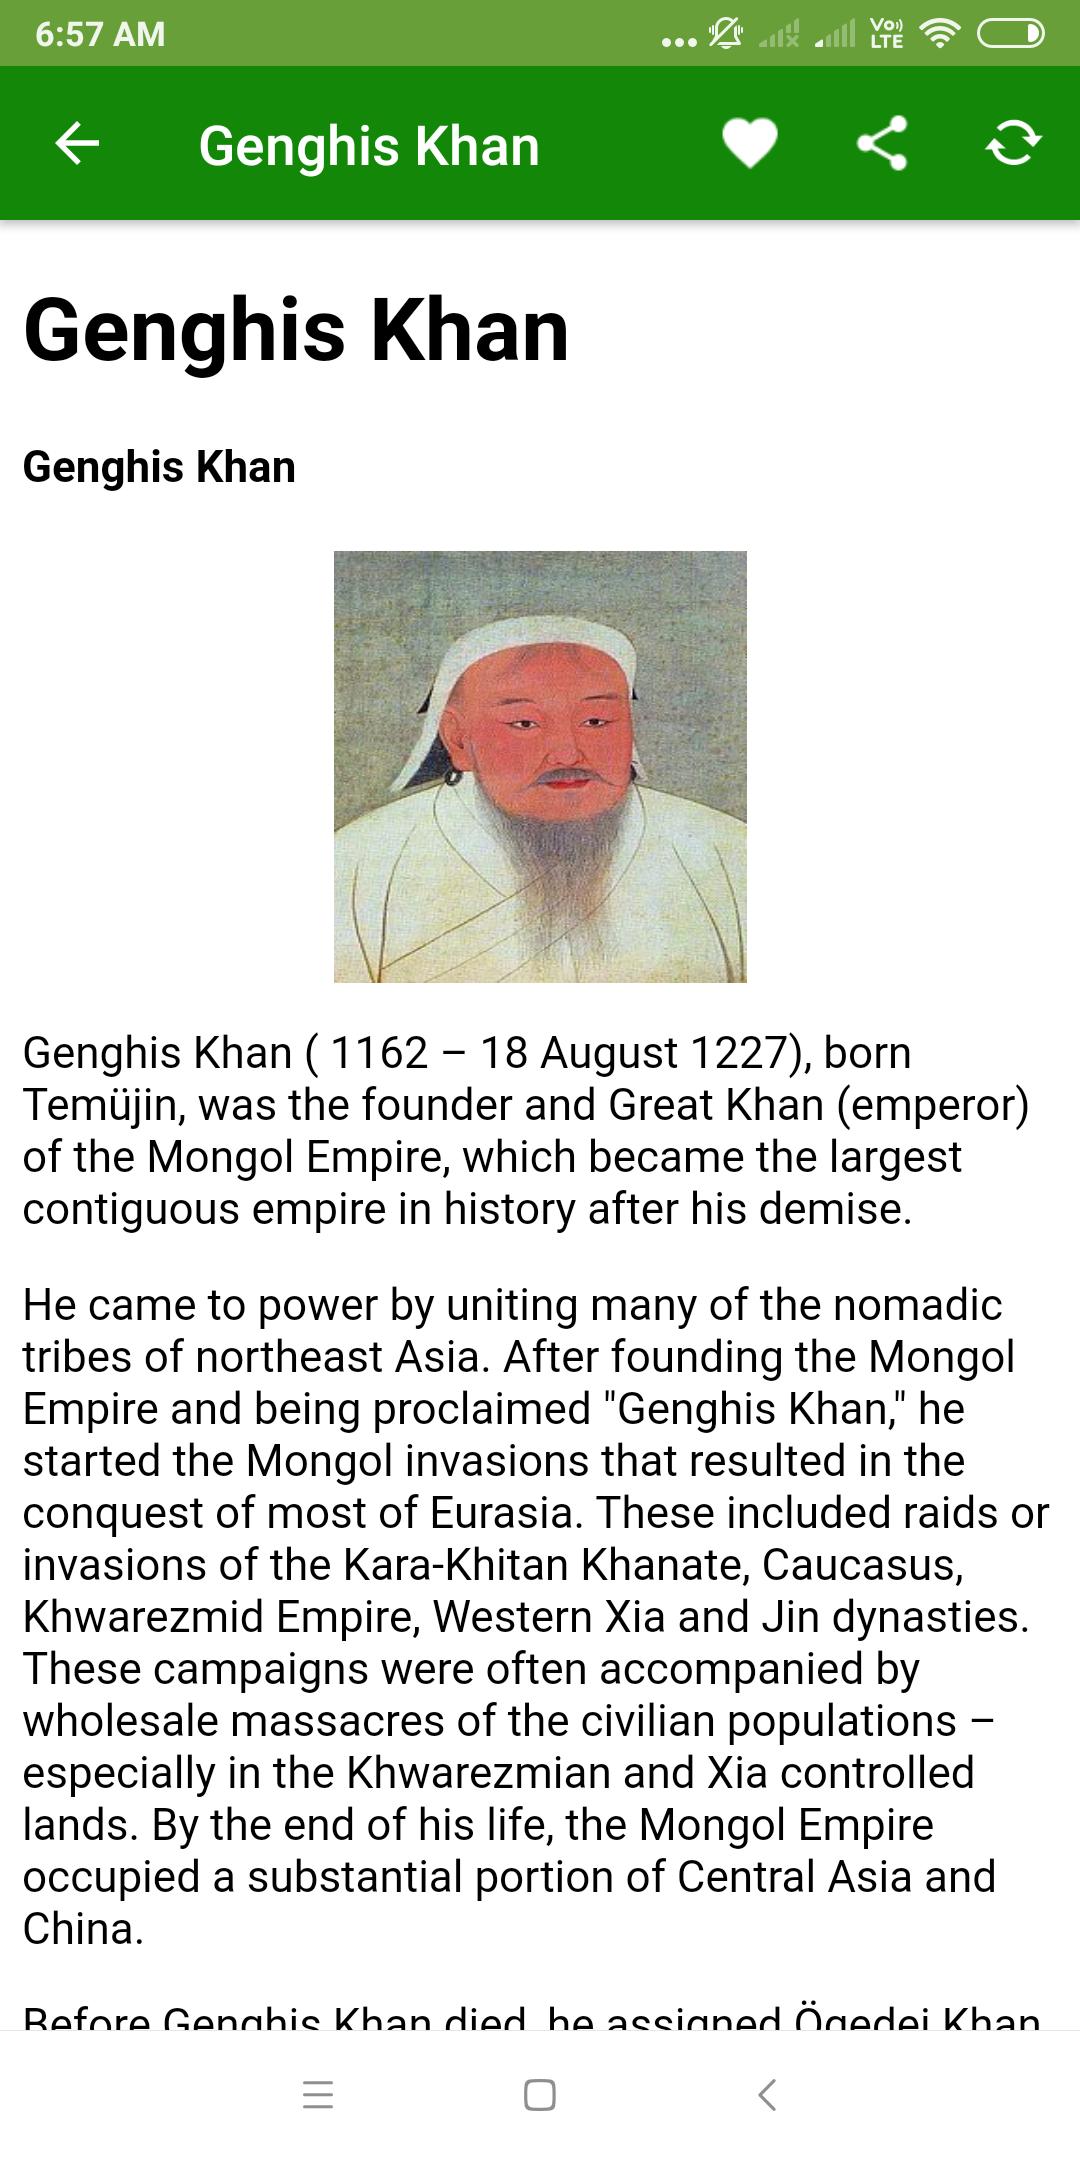 Biography of Genghis Khan for Android - APK Download